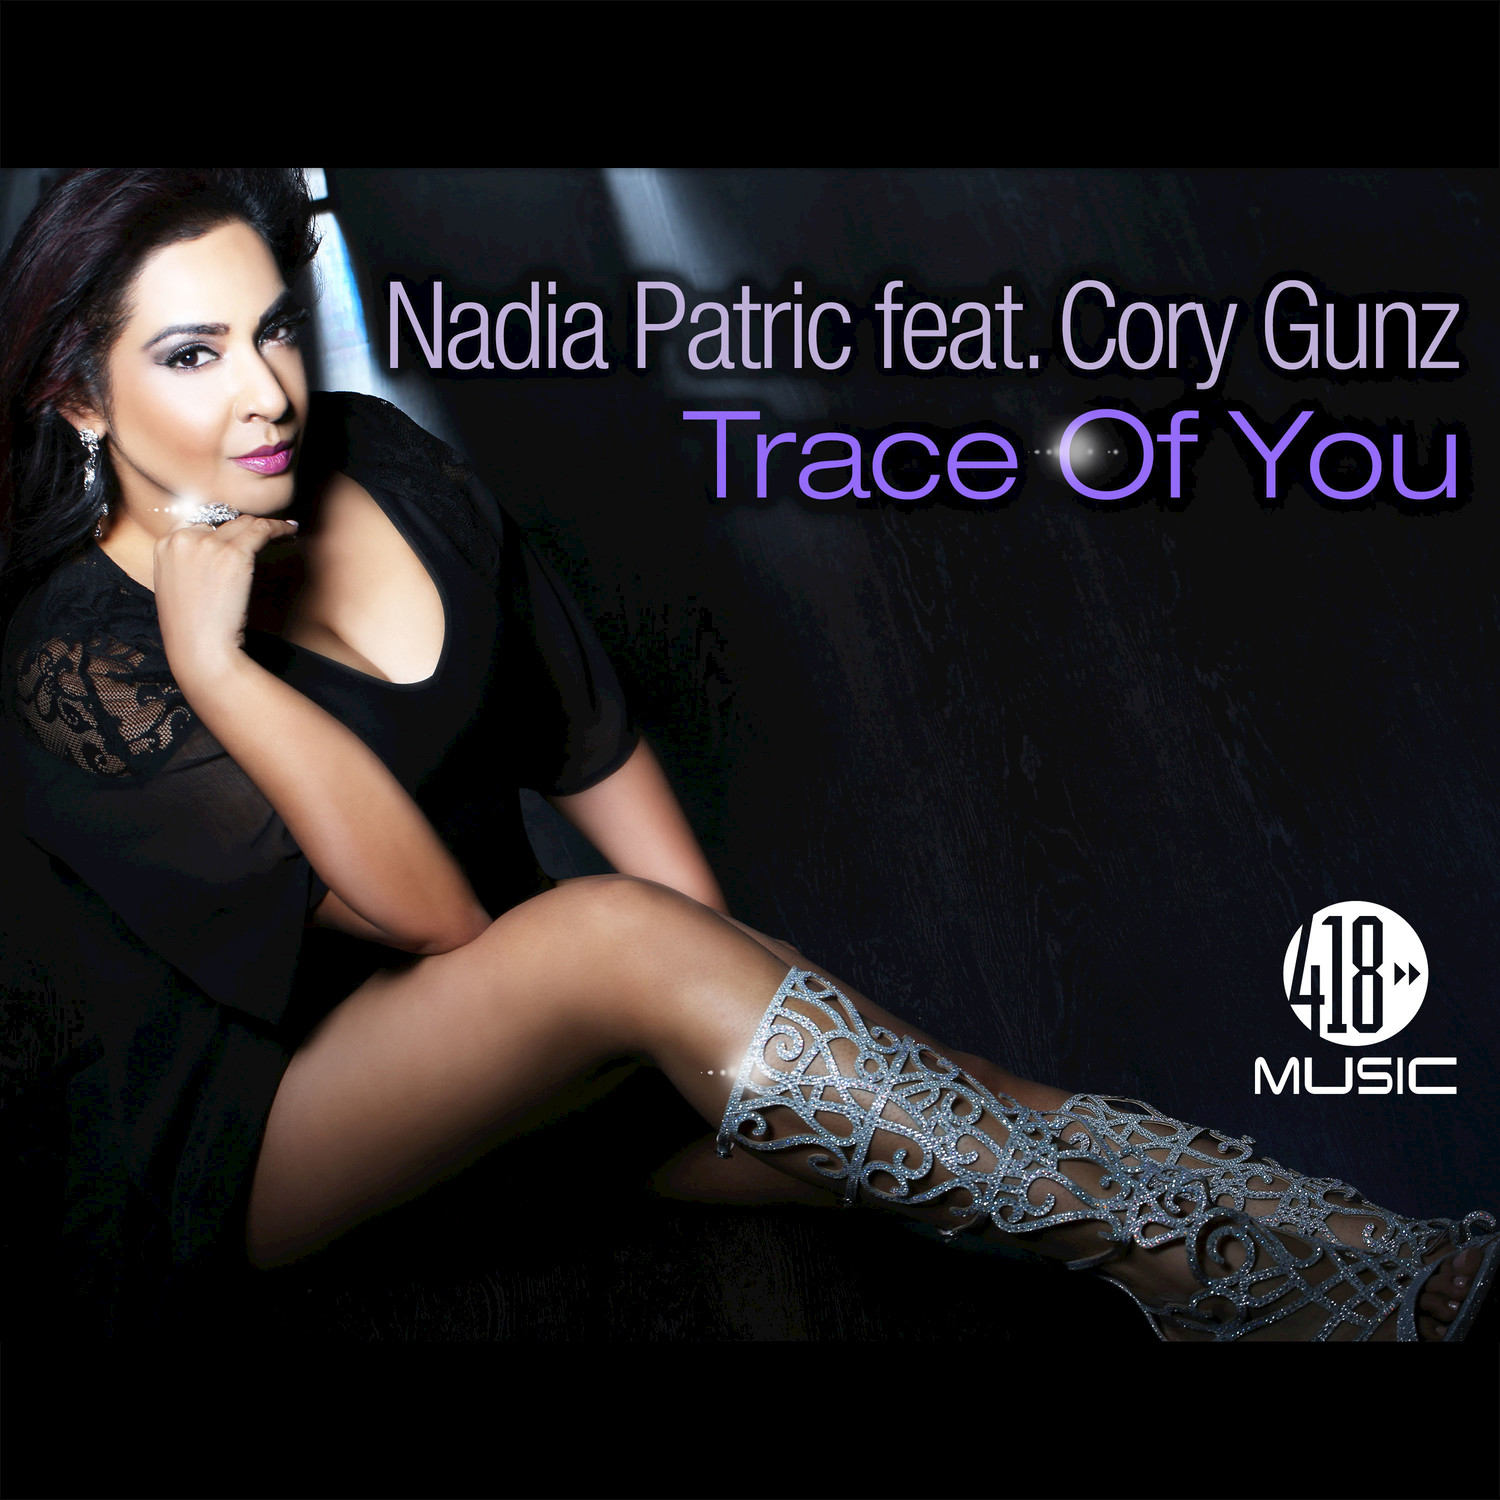 Trace of You (Serbsican Remix)